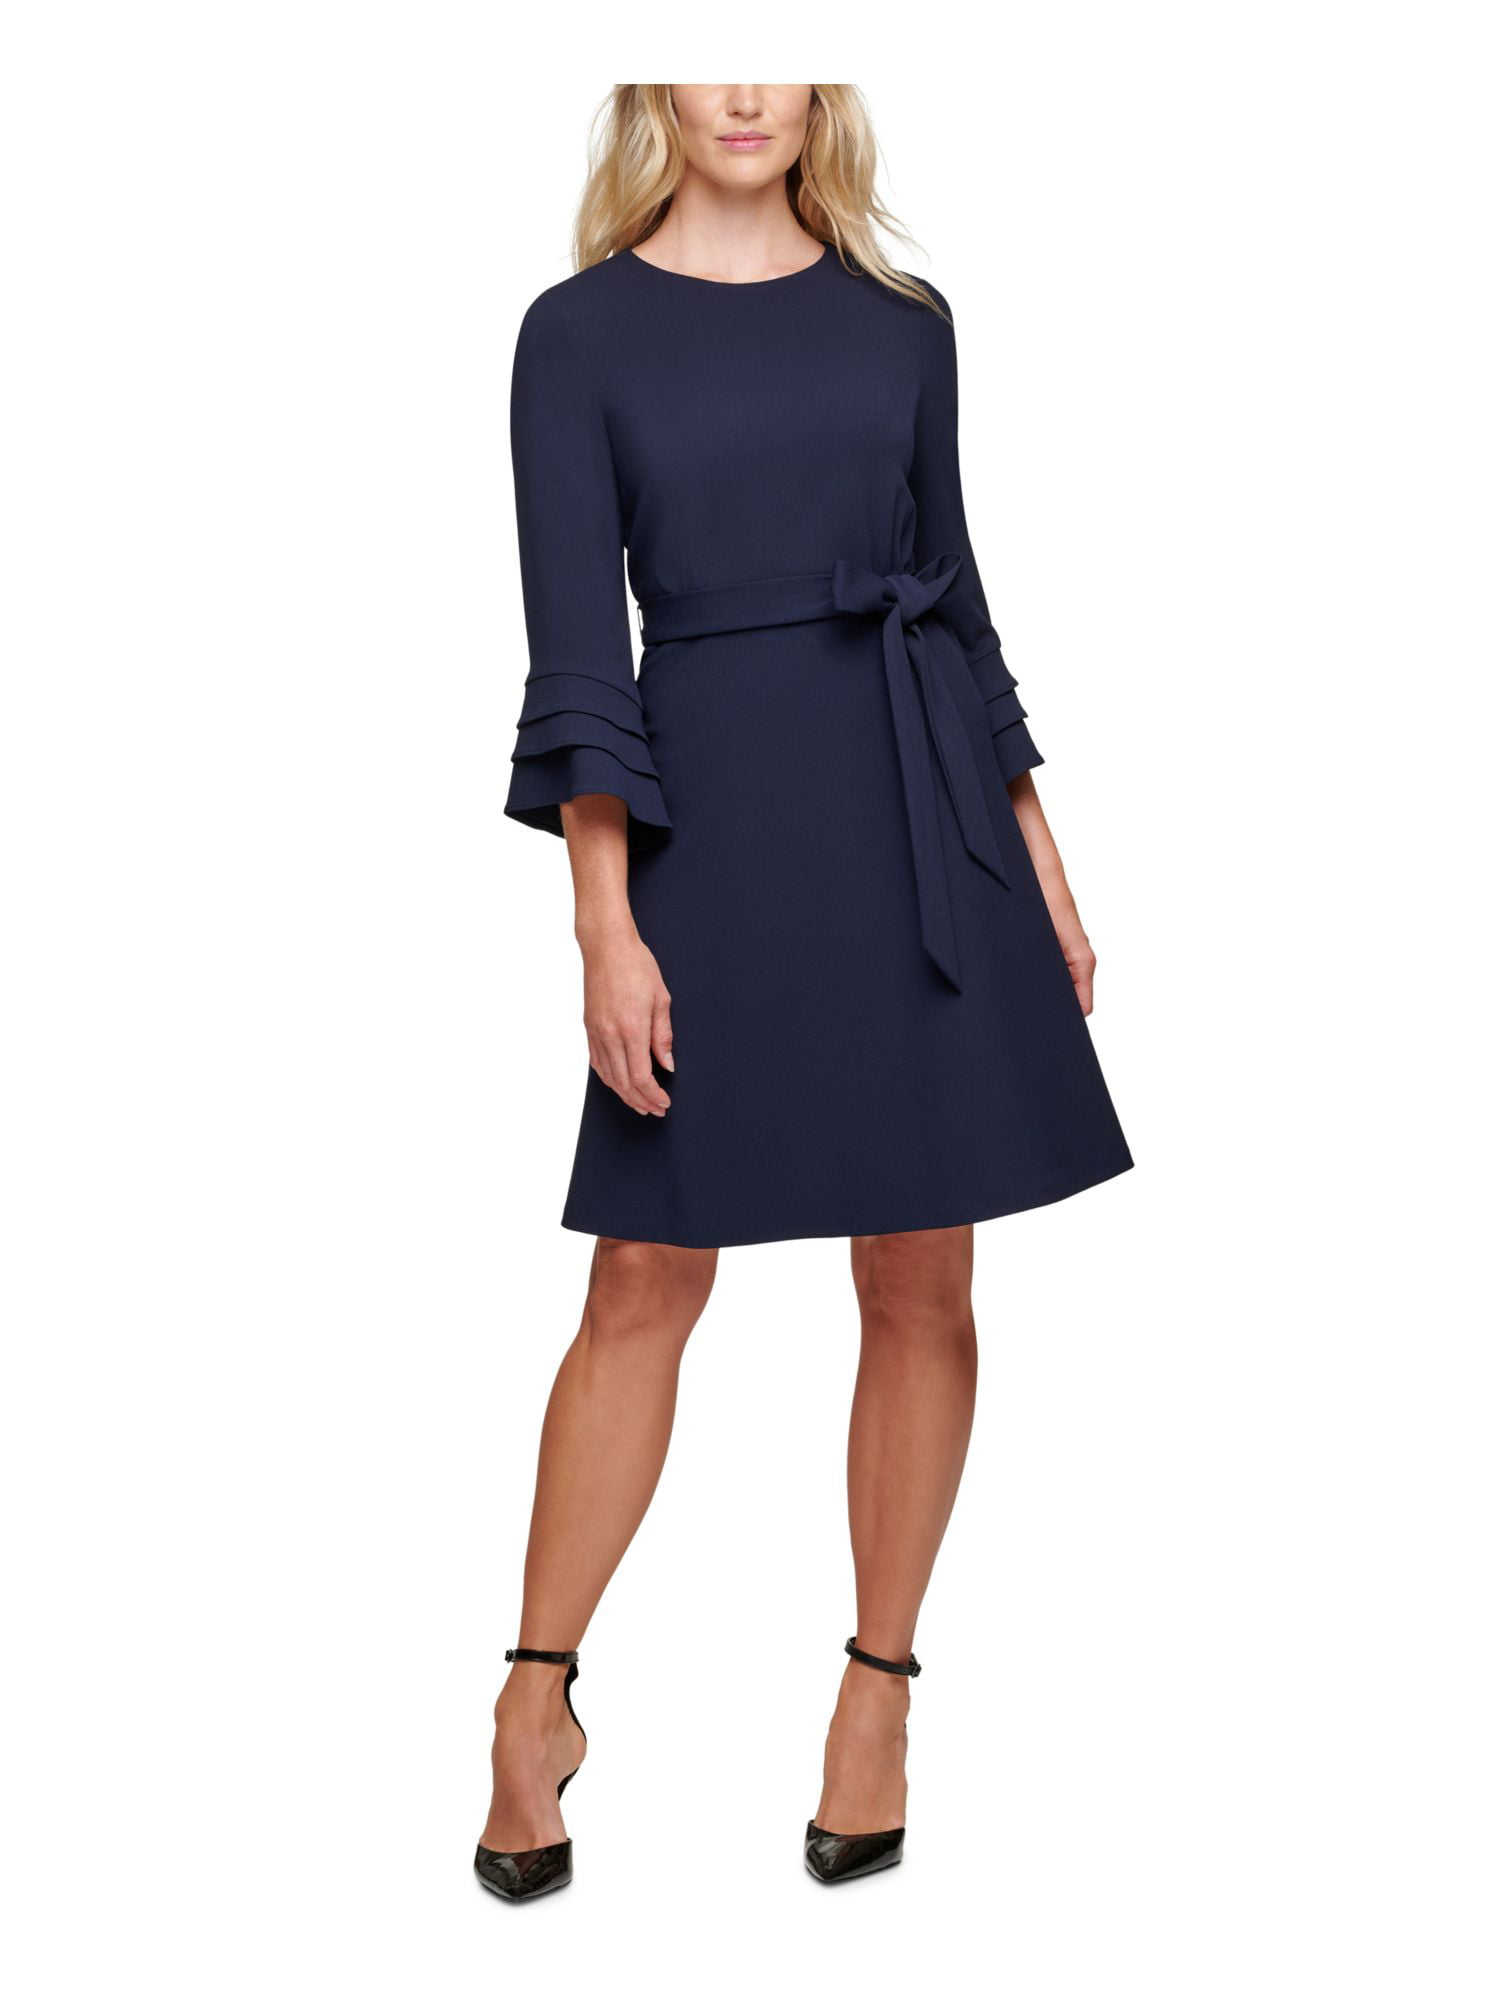 DKNY Womens Navy Belted Ruffled Fluted Bell Sleeve Jewel Neck Above The ...